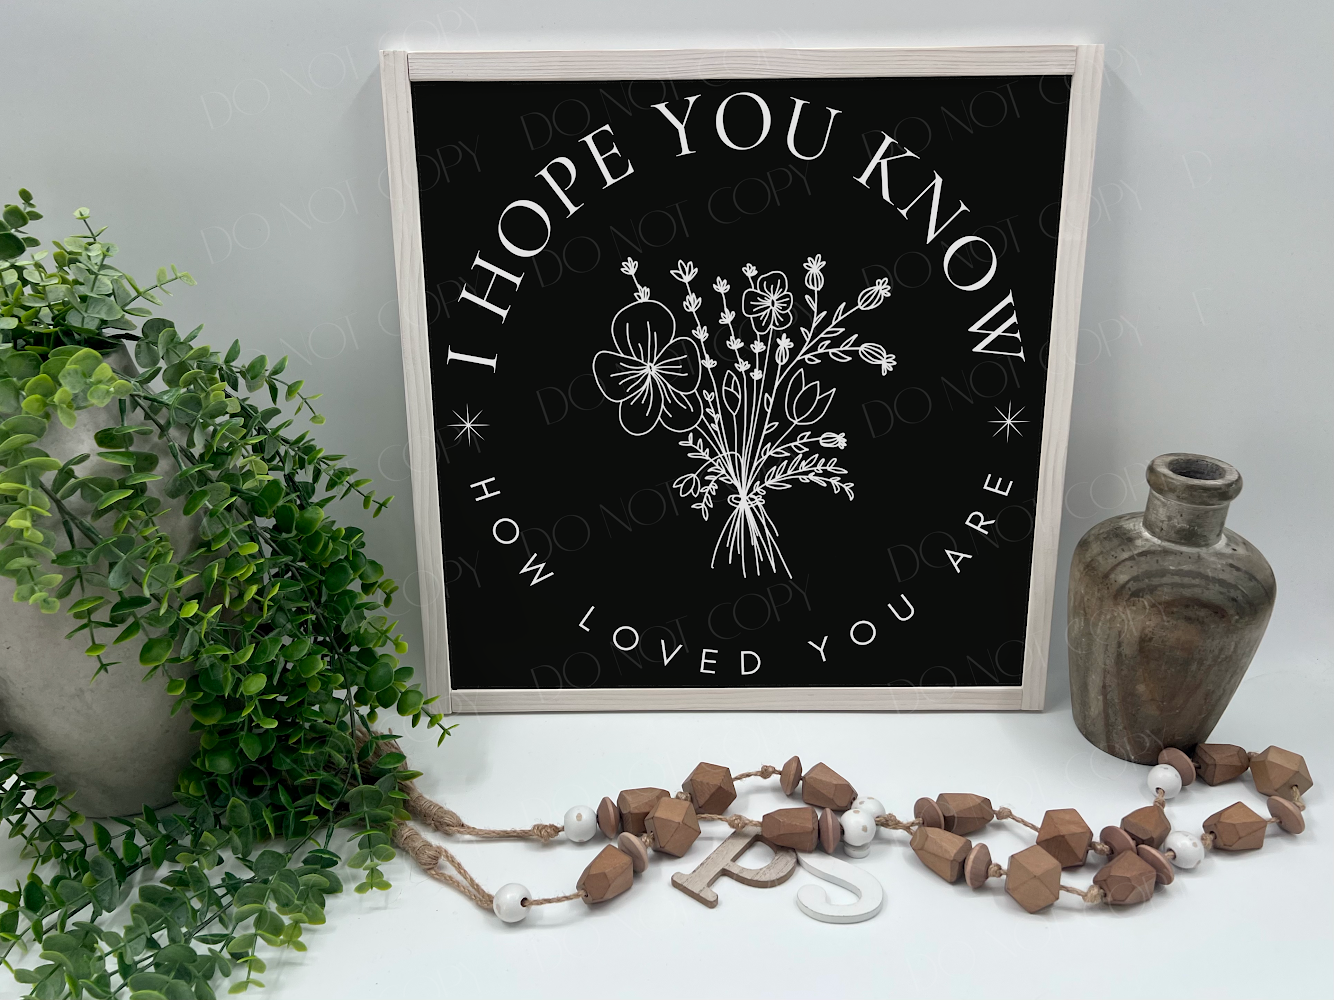 I Hope You Know How Loved You Are - Black/Thick/White Wash - Wood Sign